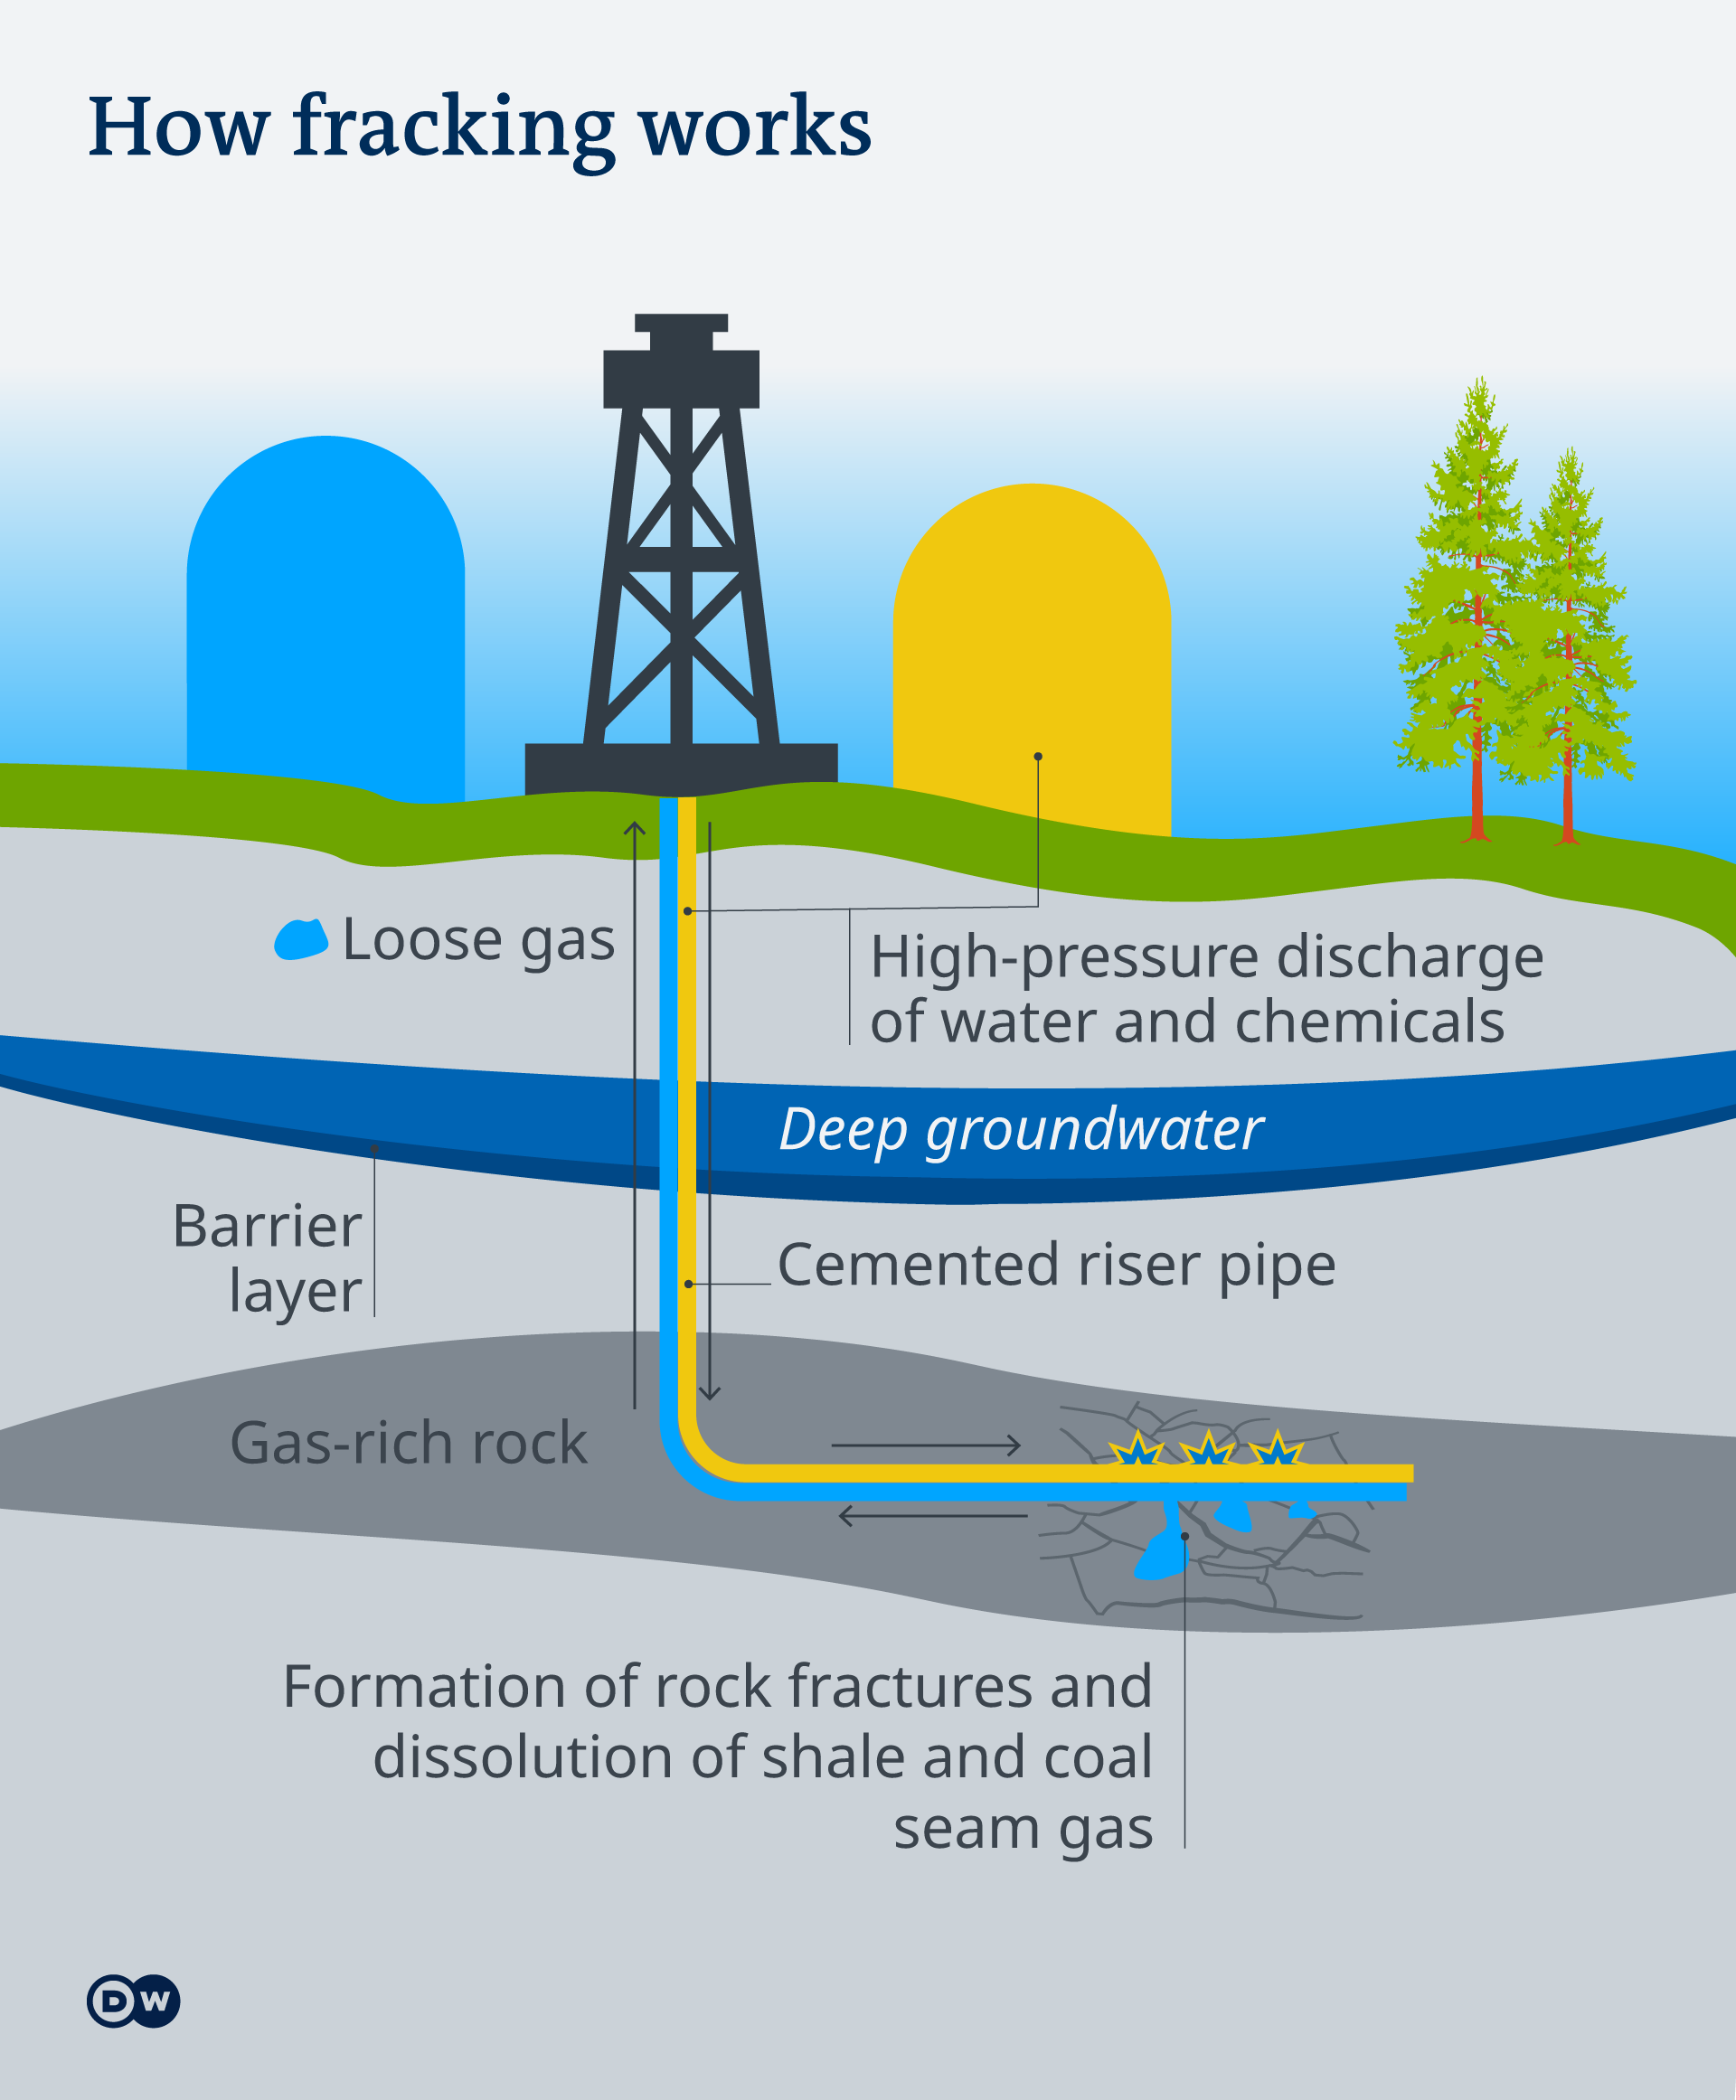 How fracking works infographic